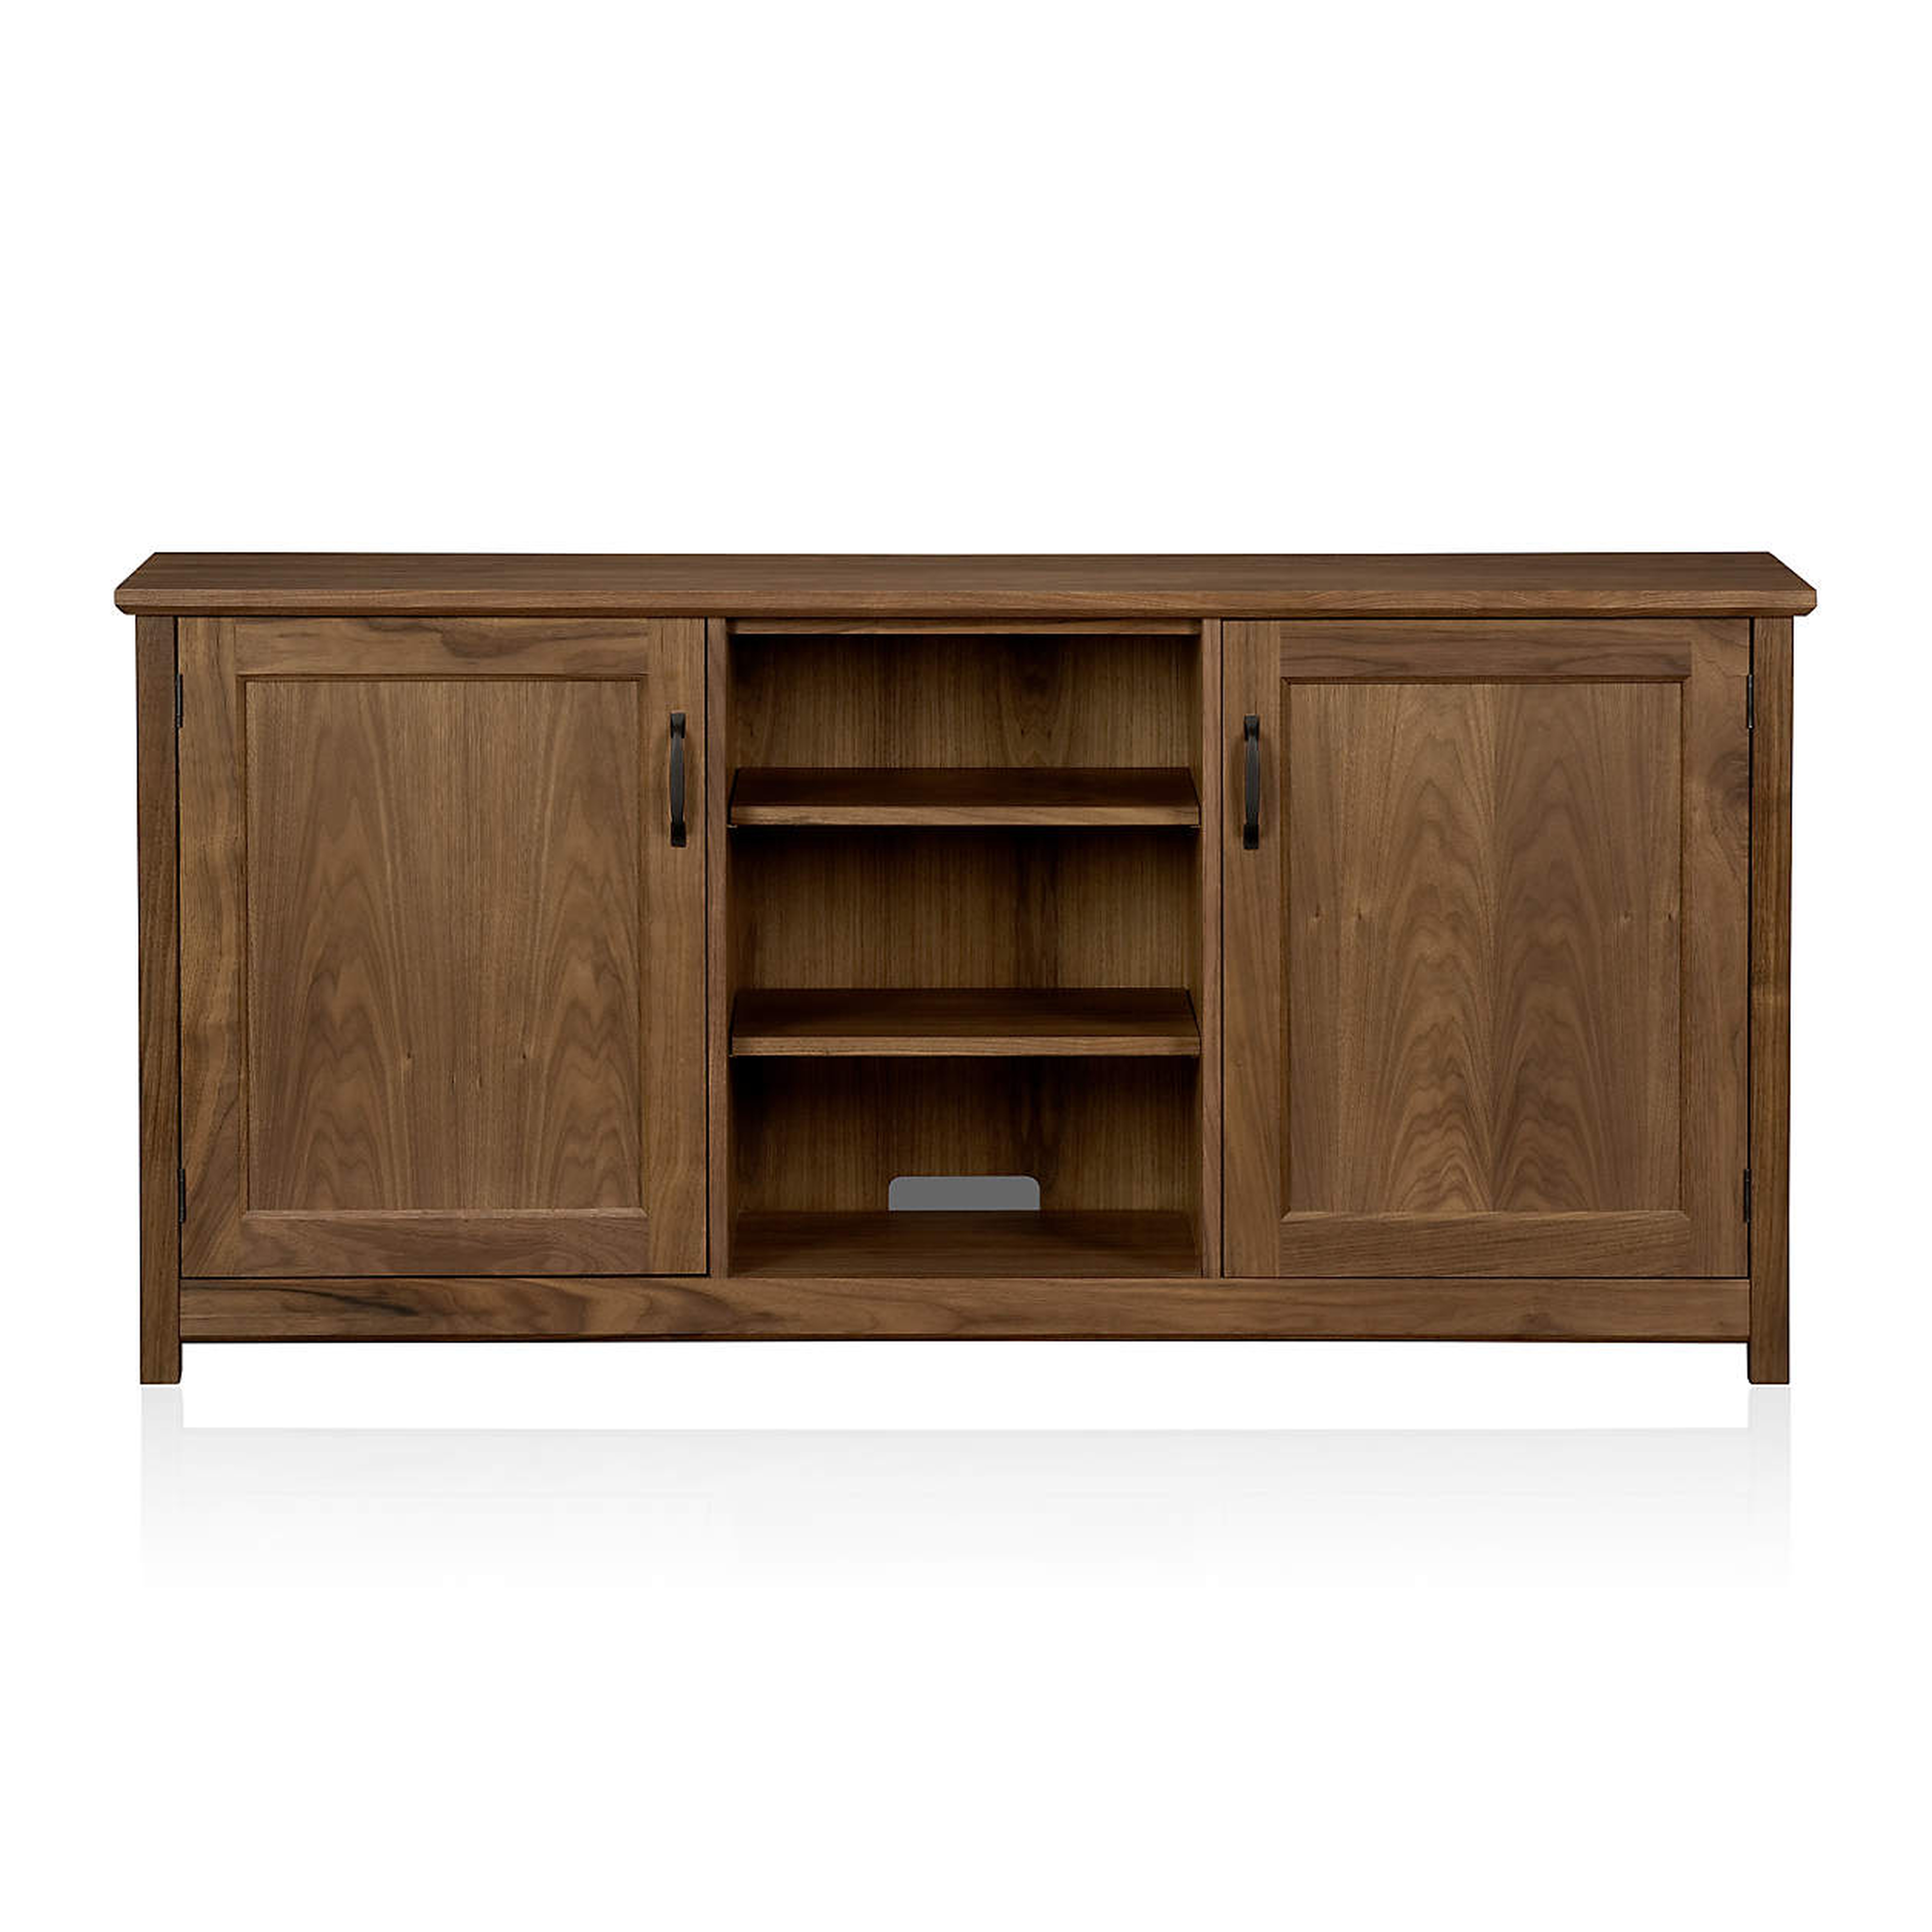 Ainsworth Walnut 64" Storage Media Console with Glass/Wood Doors - Crate and Barrel